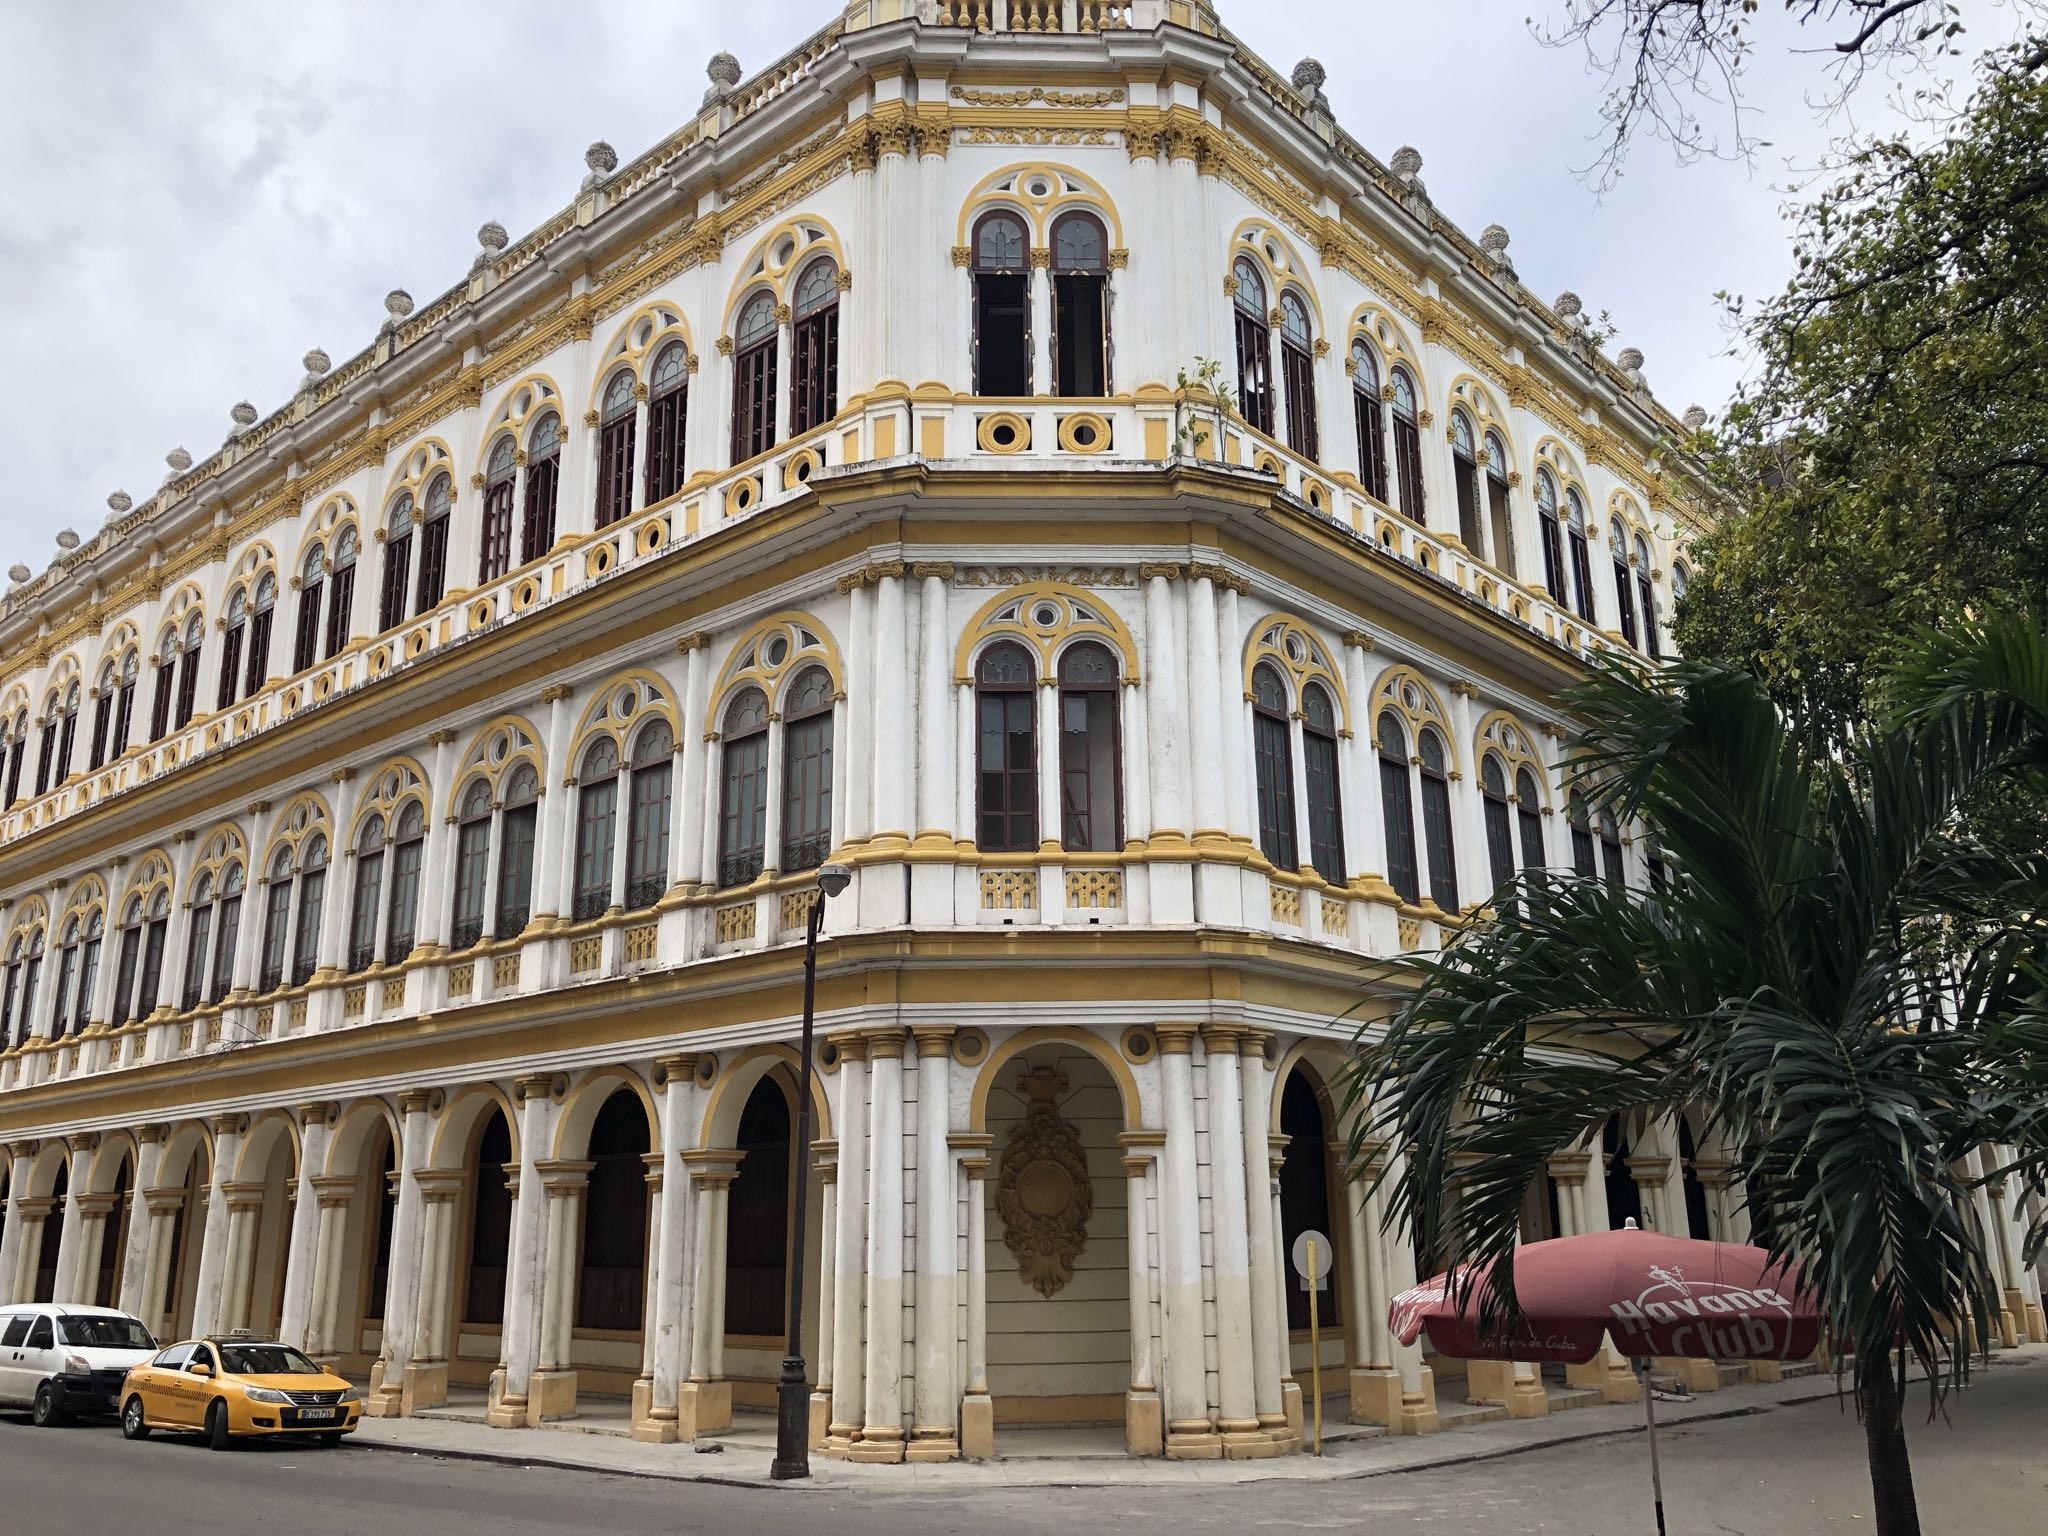 Photo 82 of 221 from the album Highlights Cuba 2019.